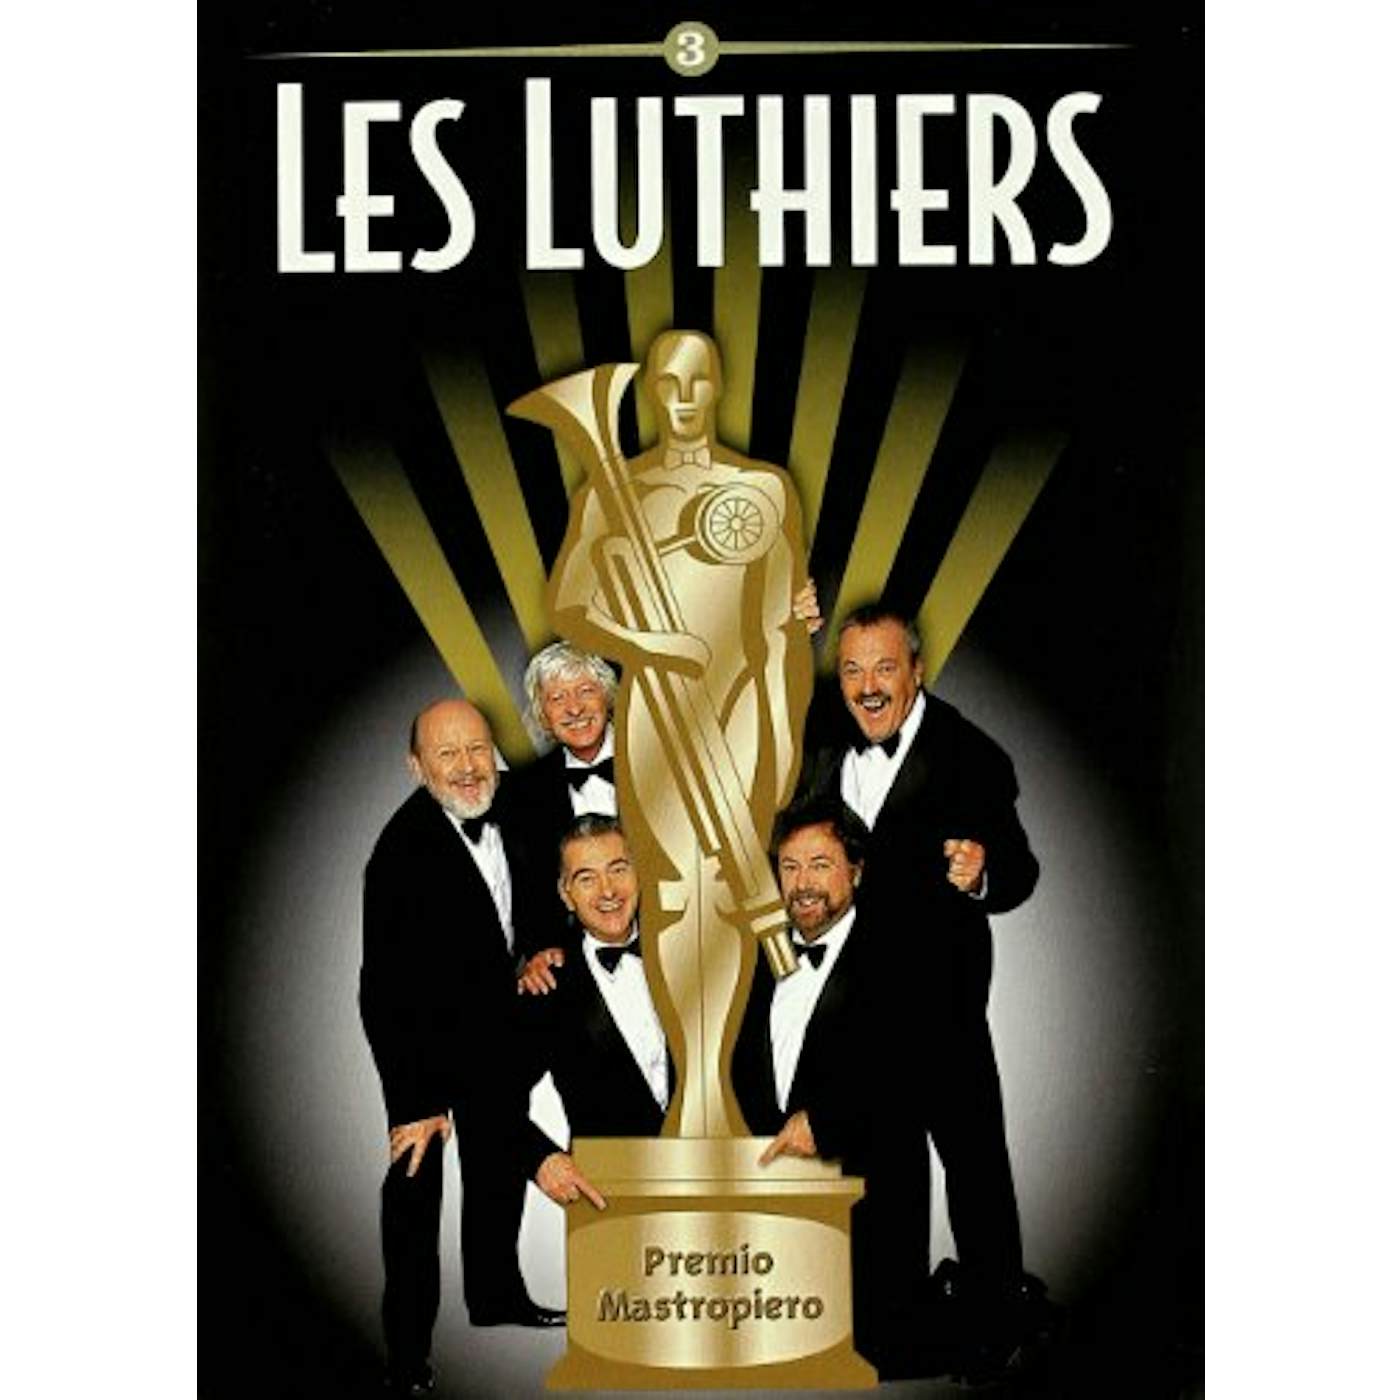 Les Luthiers PACK ANIVERSARIO 3 DVD